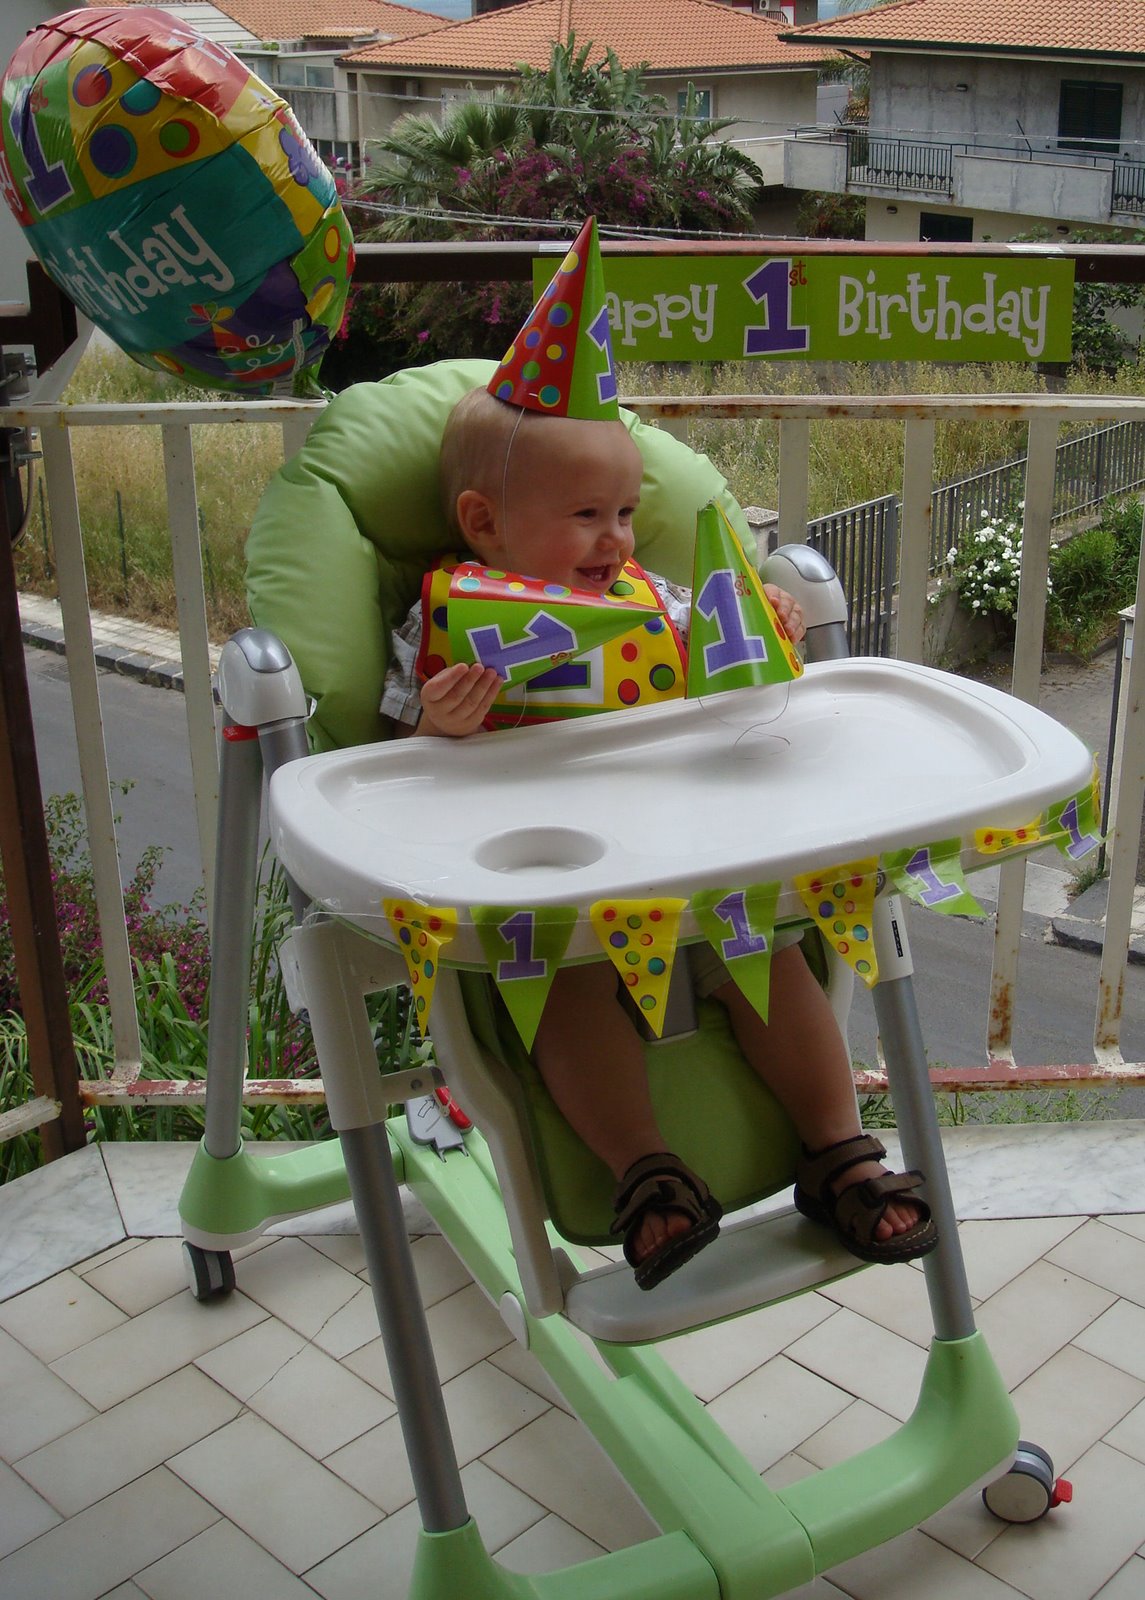 [Currier+with+B-day+decor.jpg]